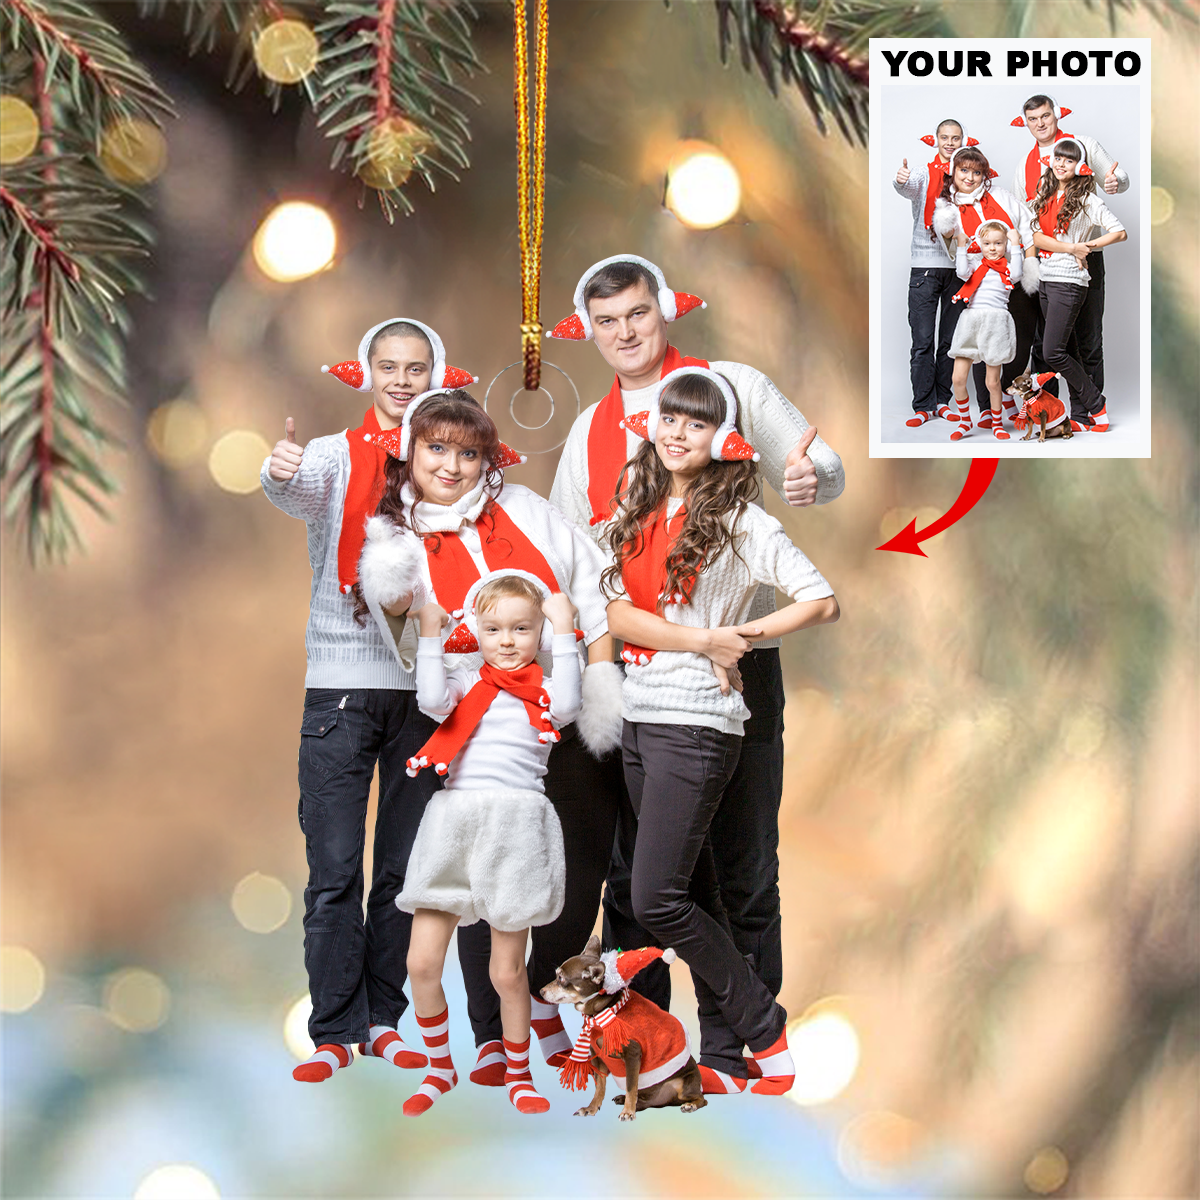 Customized Your Photo Ornament - Personalized Photo Mica Ornament - Christmas Gift For Family Members